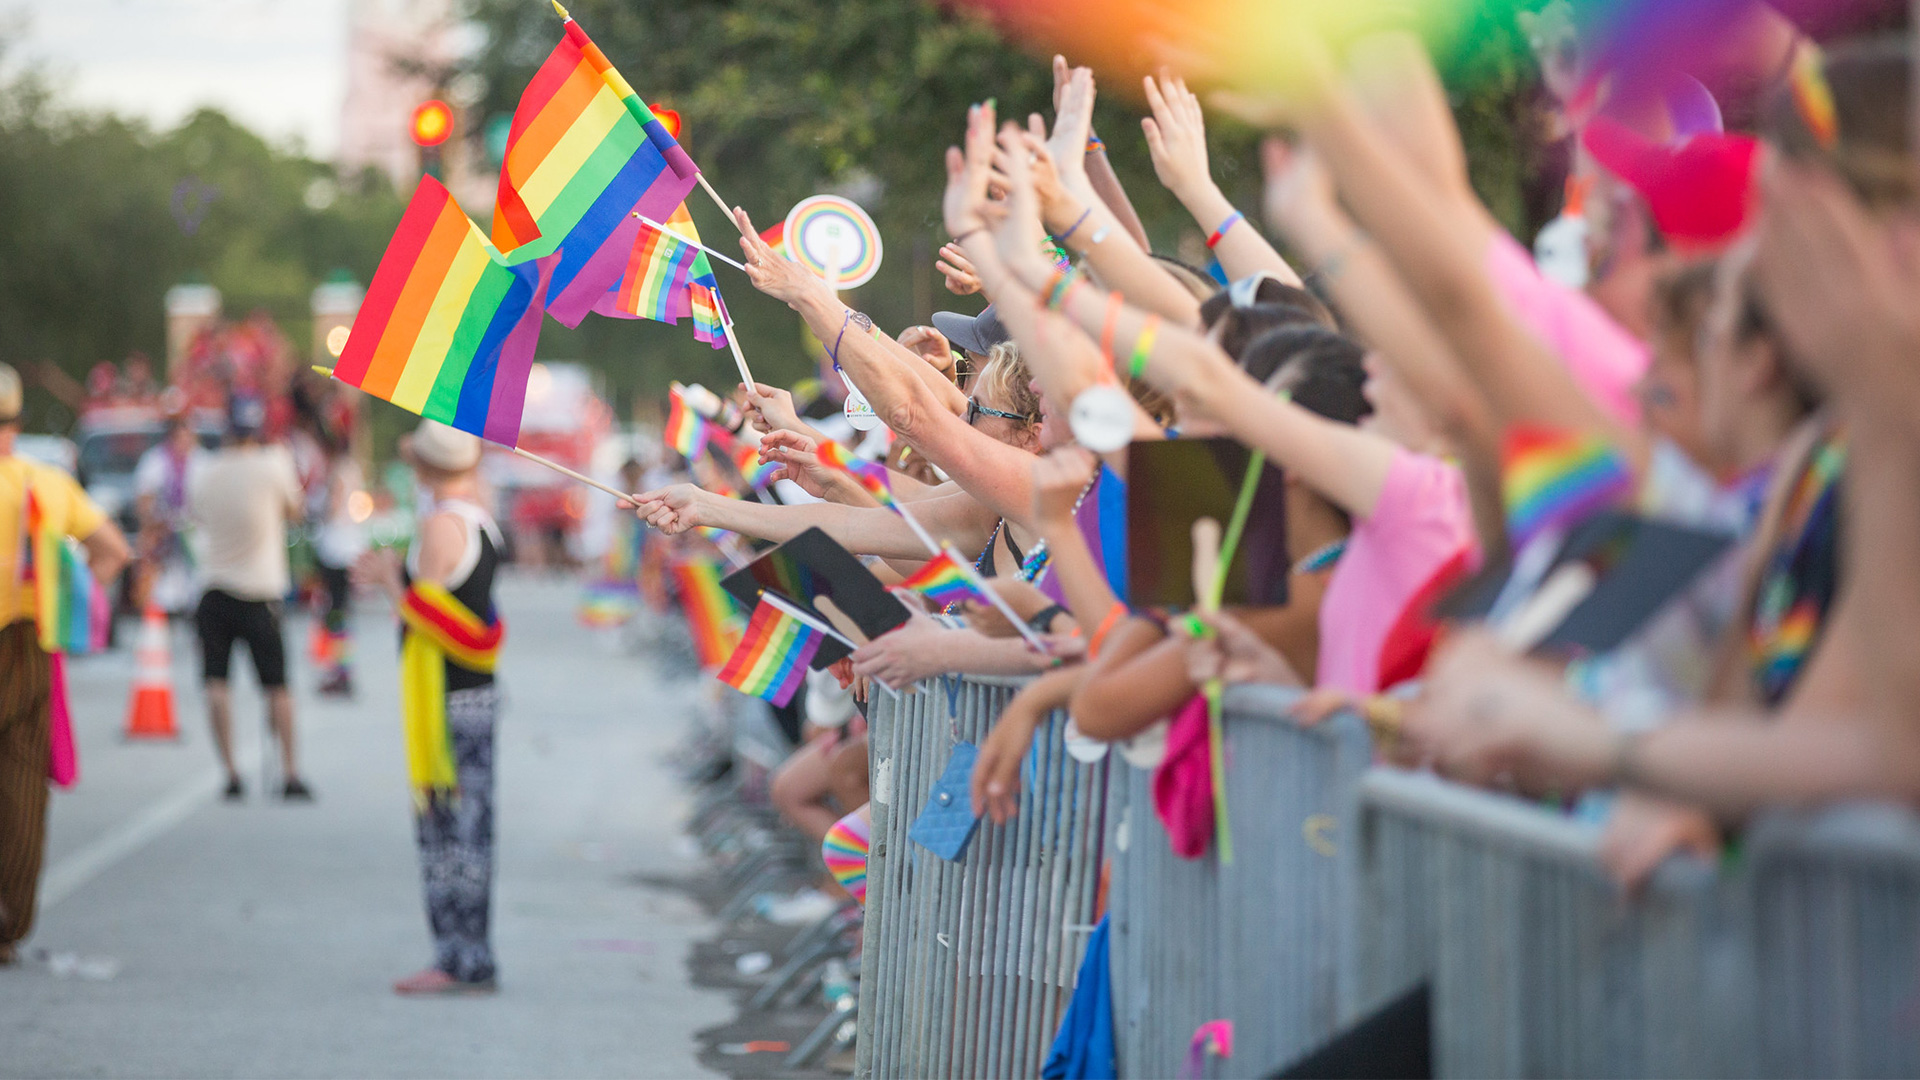 St. Pete Pride has been canceled, will return in 2021 - I ...